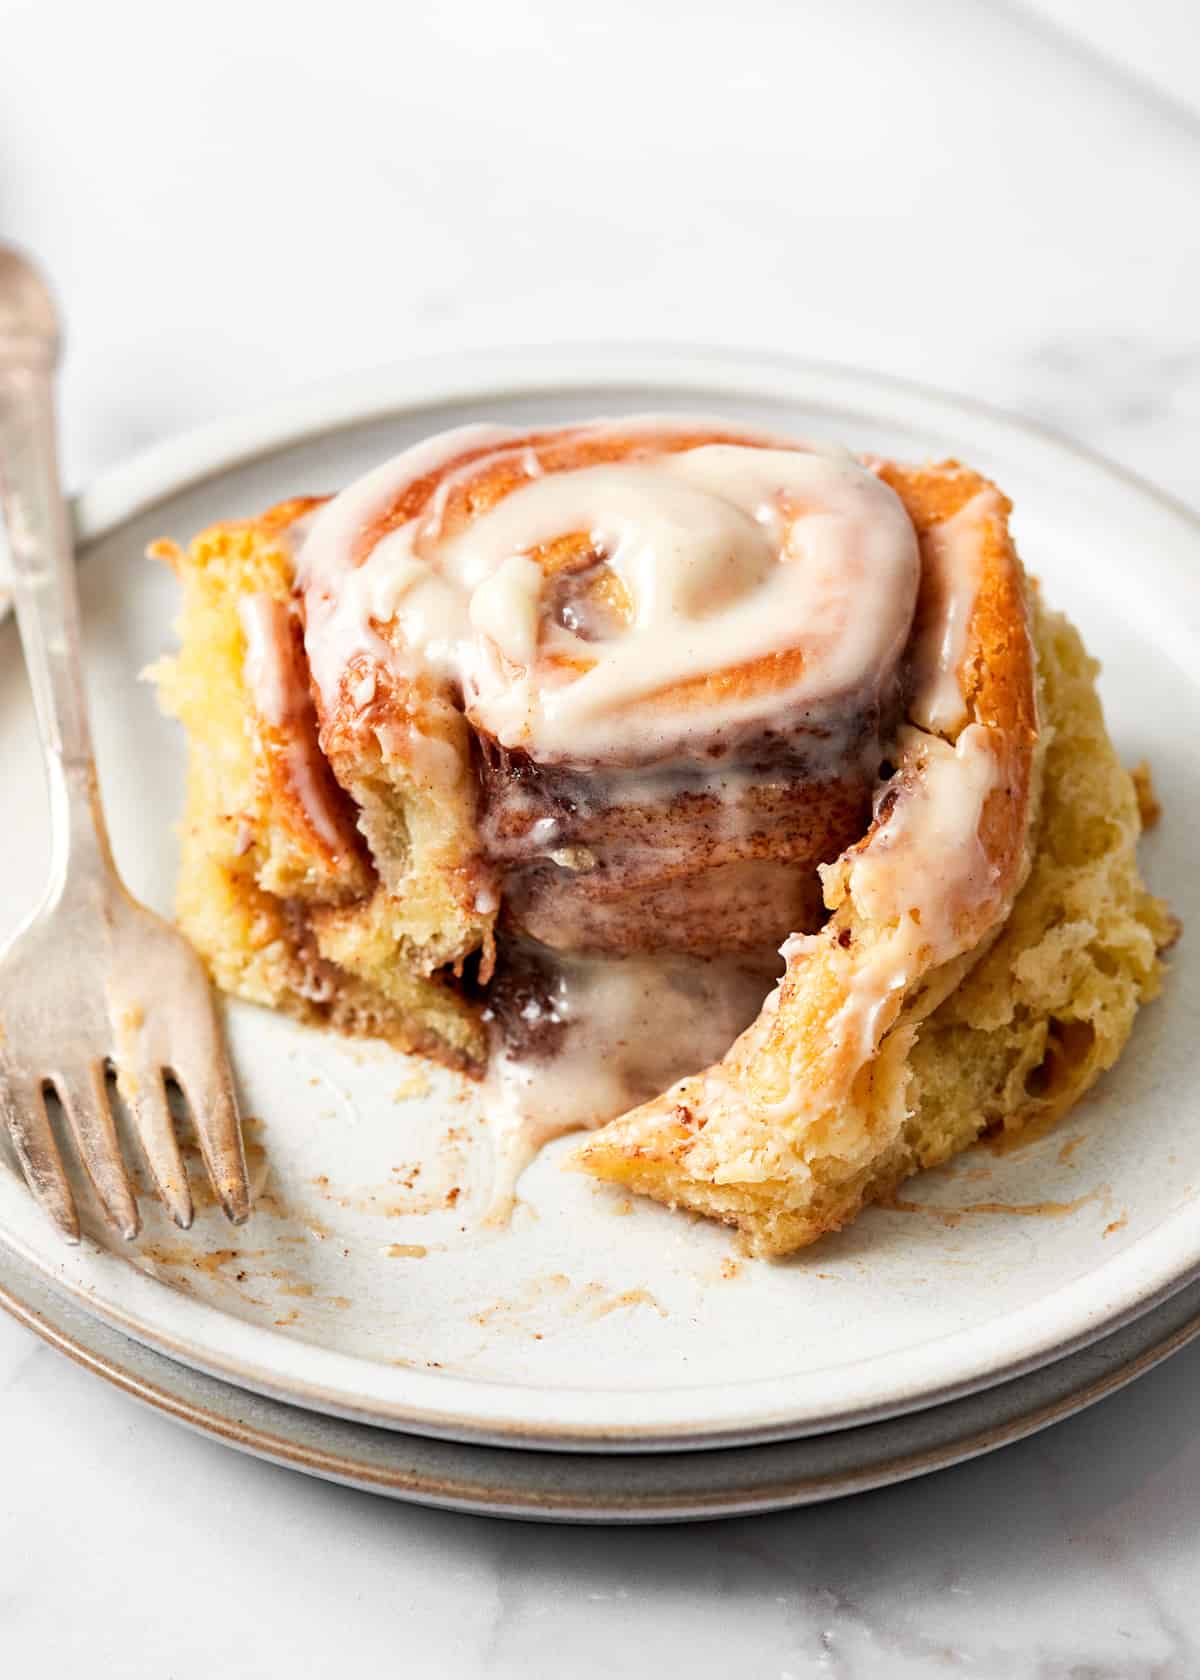 cinnamon roll with cream cheese icing on a plate.